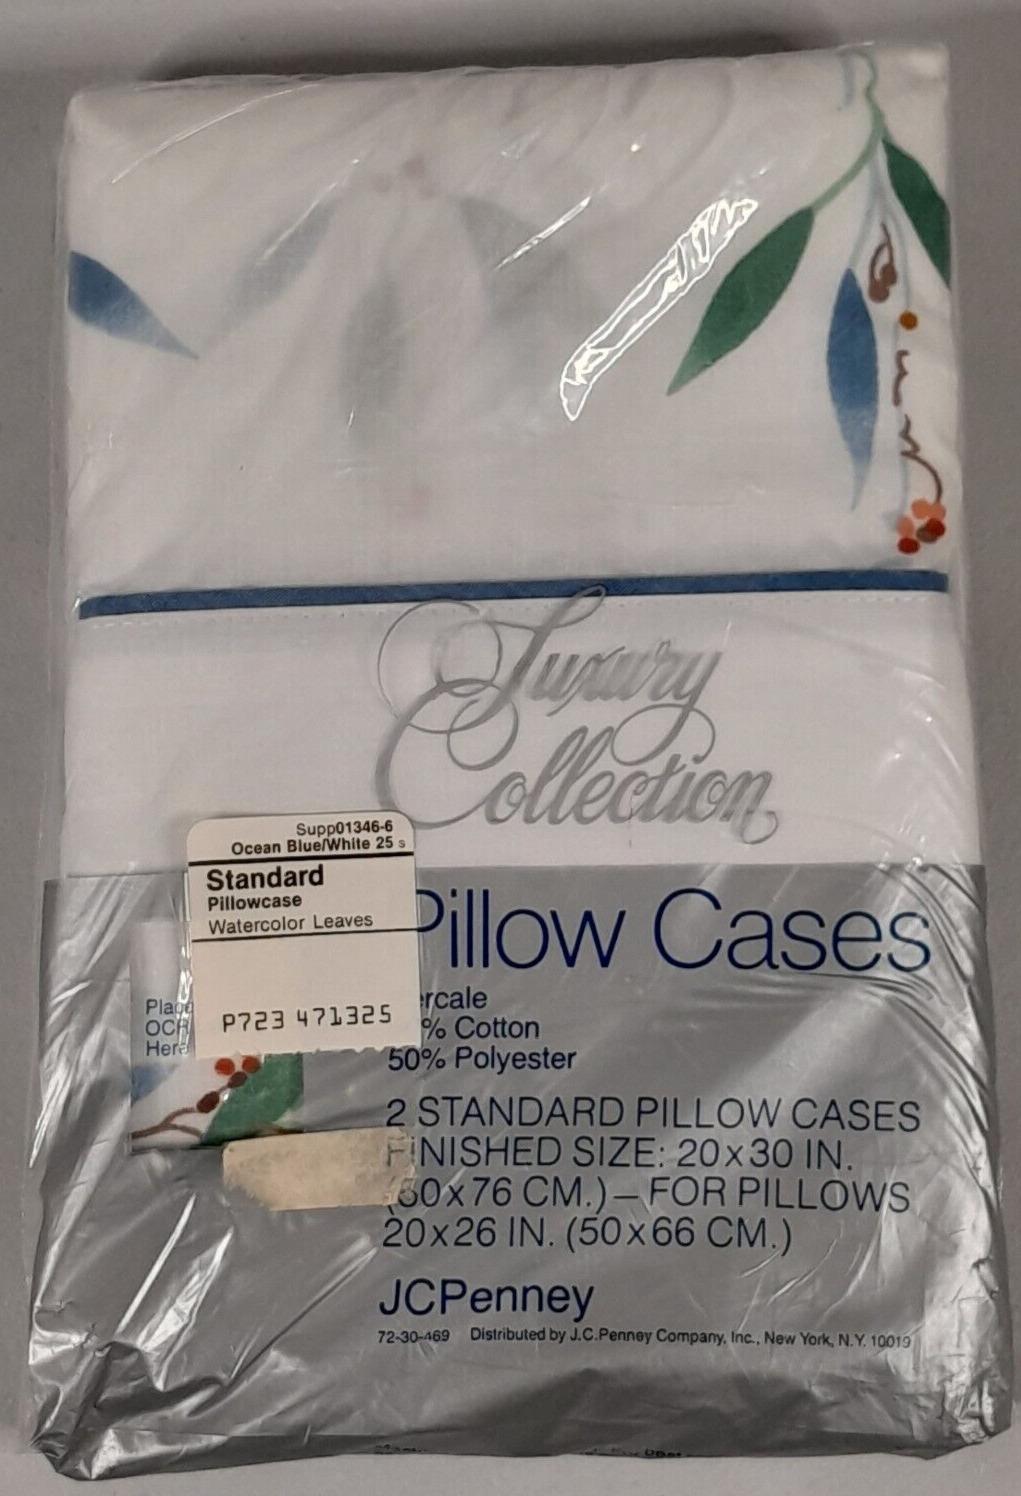 Vintage JC Penney Luxury Collection Pillow Cases 2 Standard Finished Size 20X30